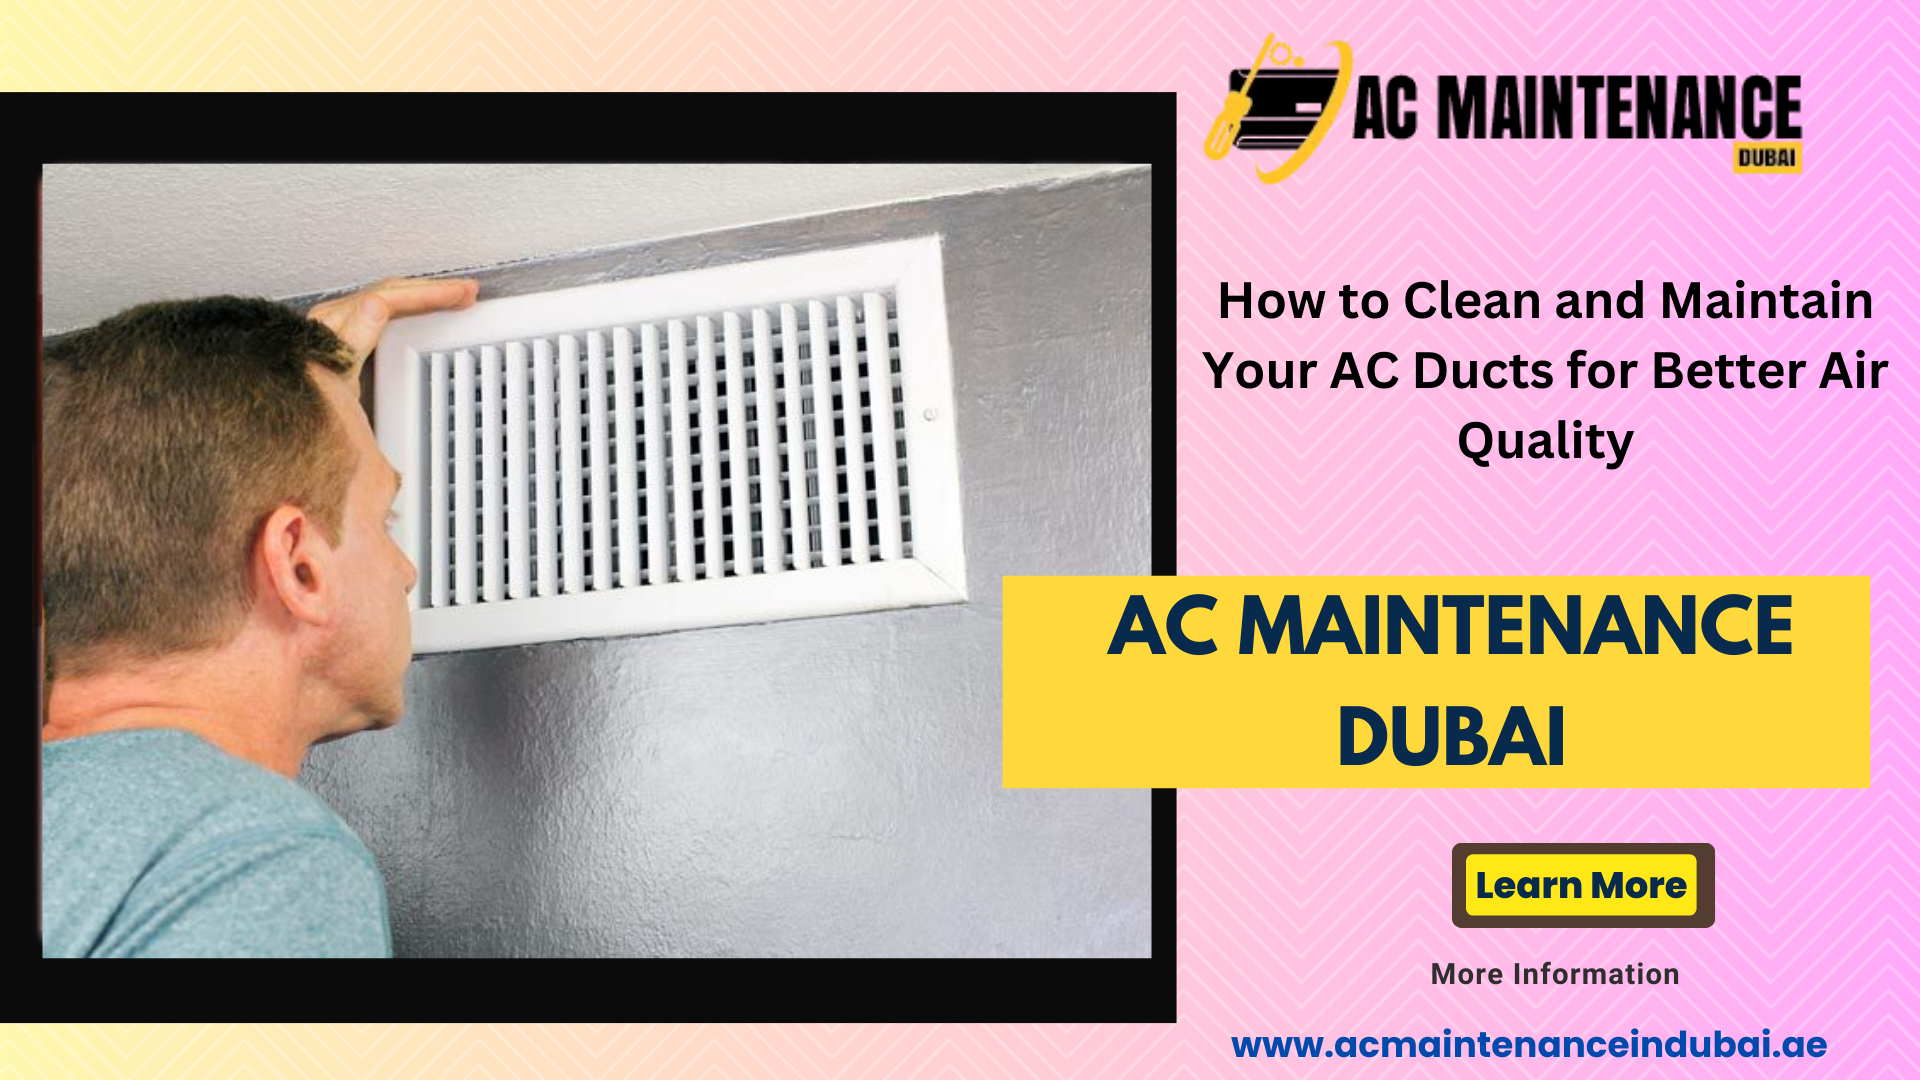 How to Clean and Maintain Your AC Ducts for Better Air Quality